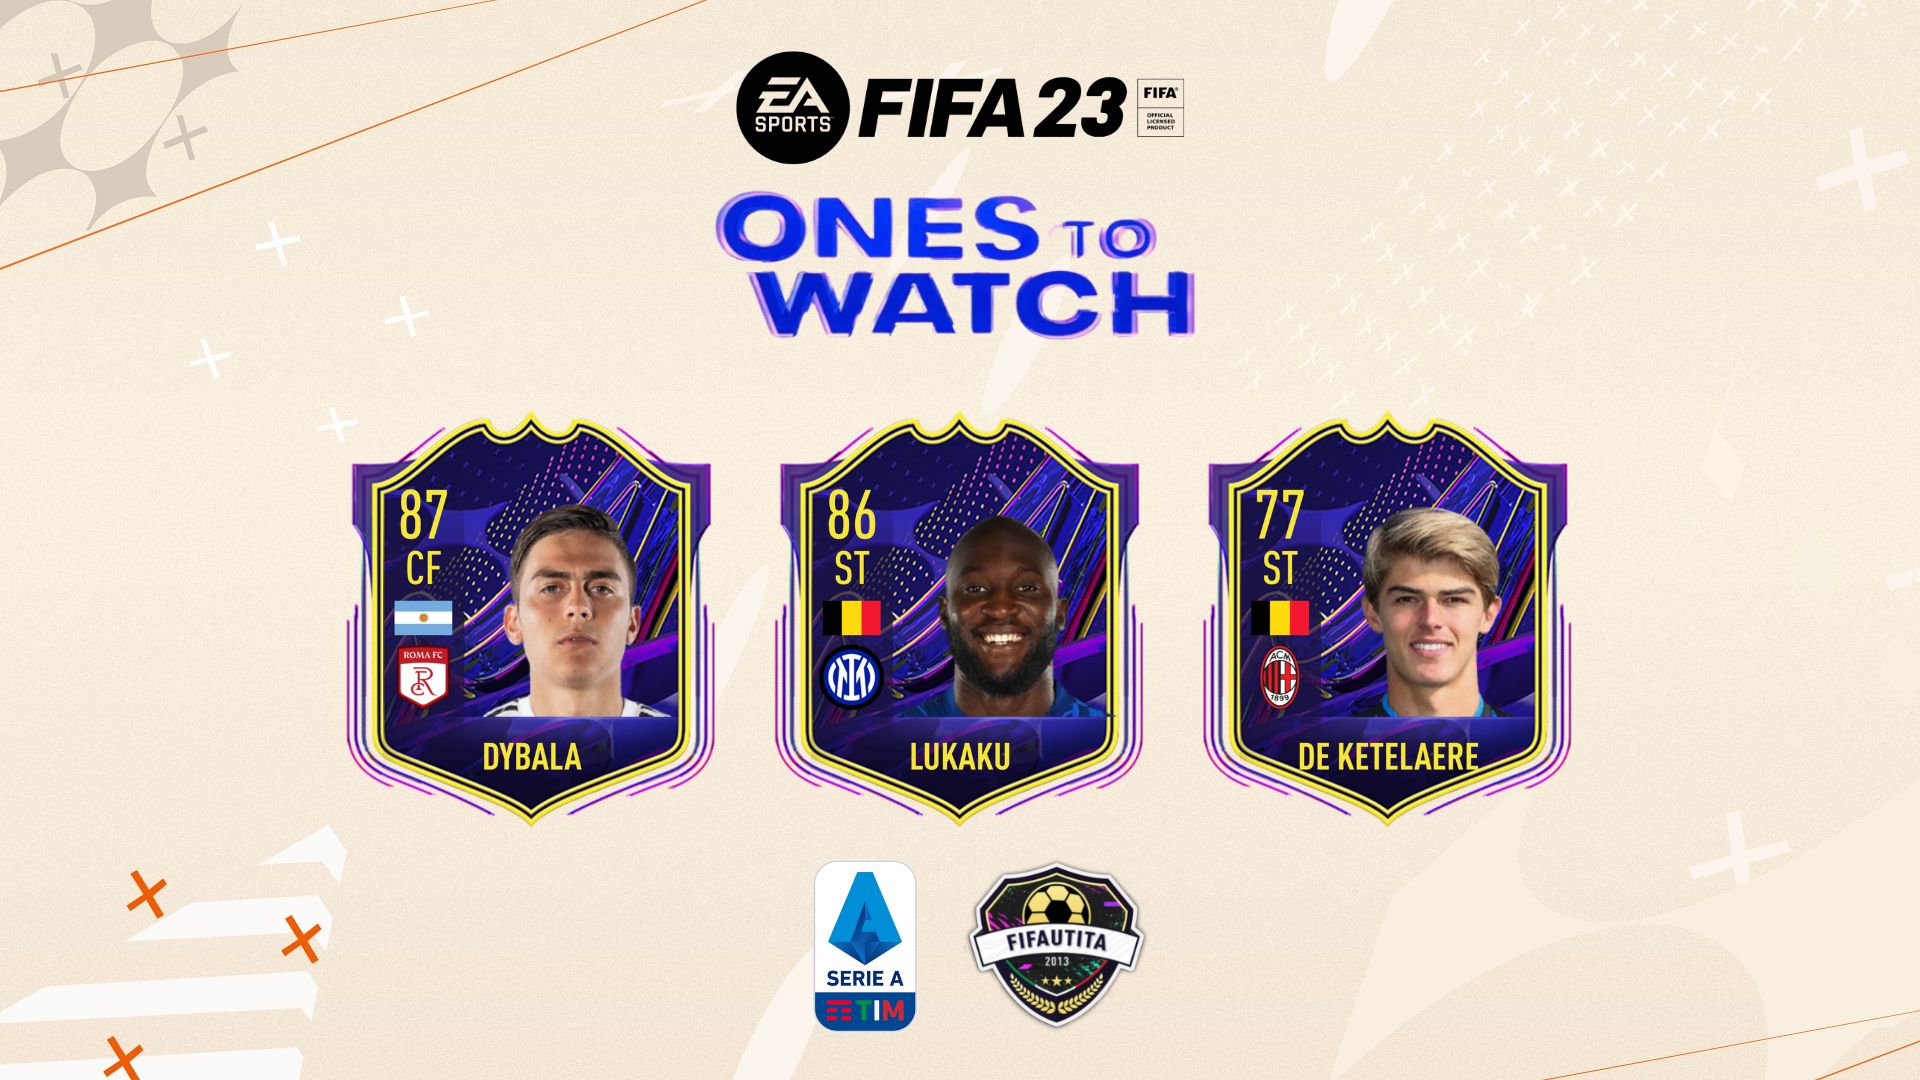 FIFA 23 OTW: Attaccanti Serie A Ones to Watch prediction